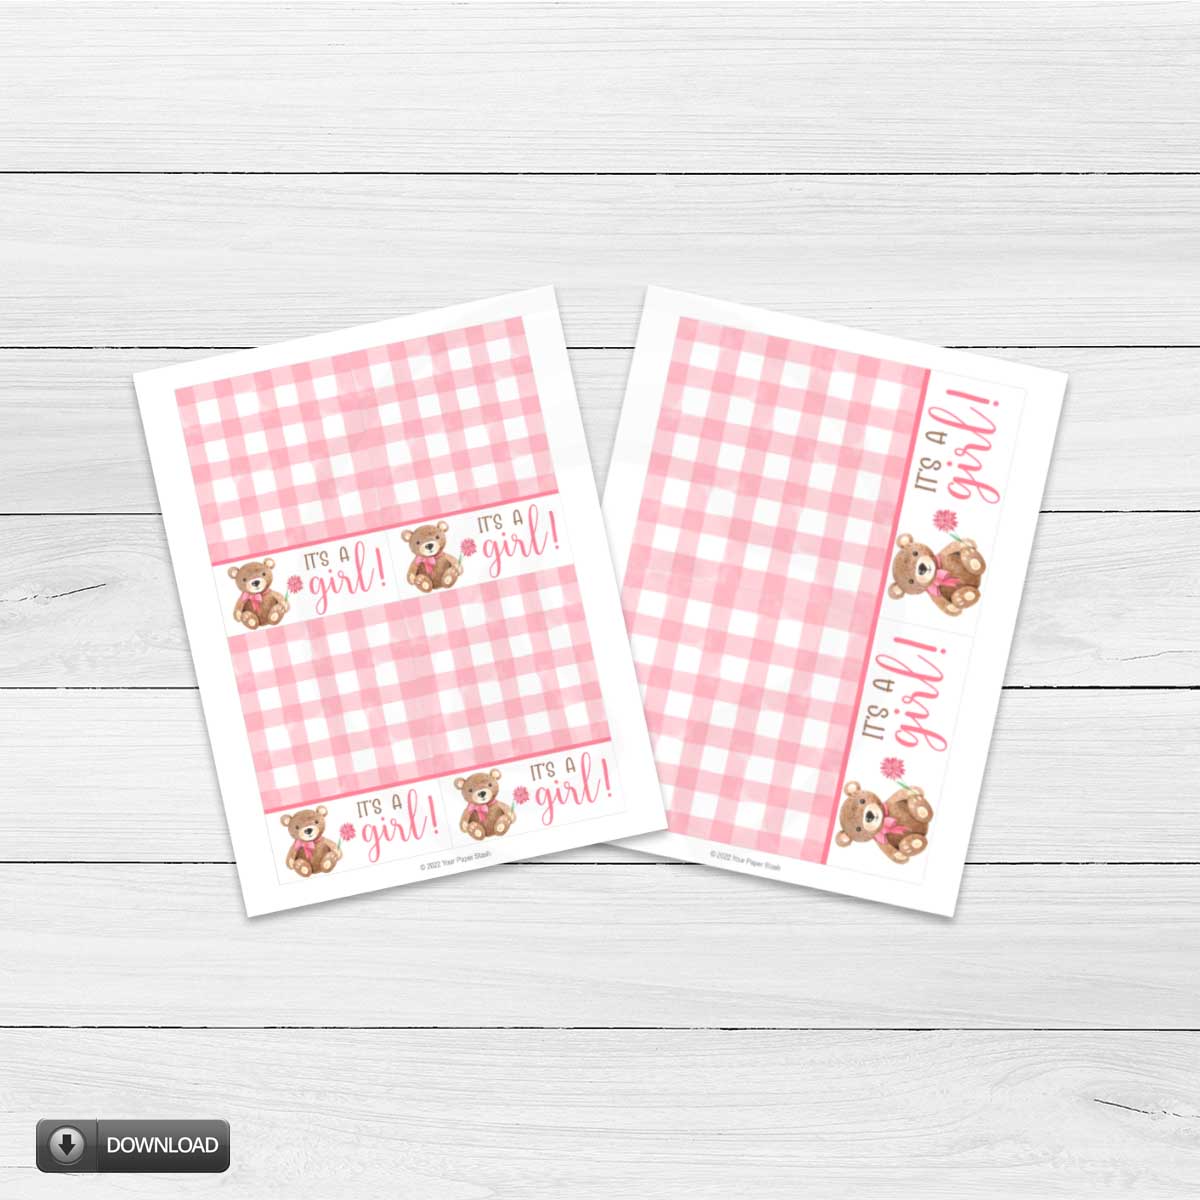 It's A Girl Printable Cookie Cards or Advice Cards